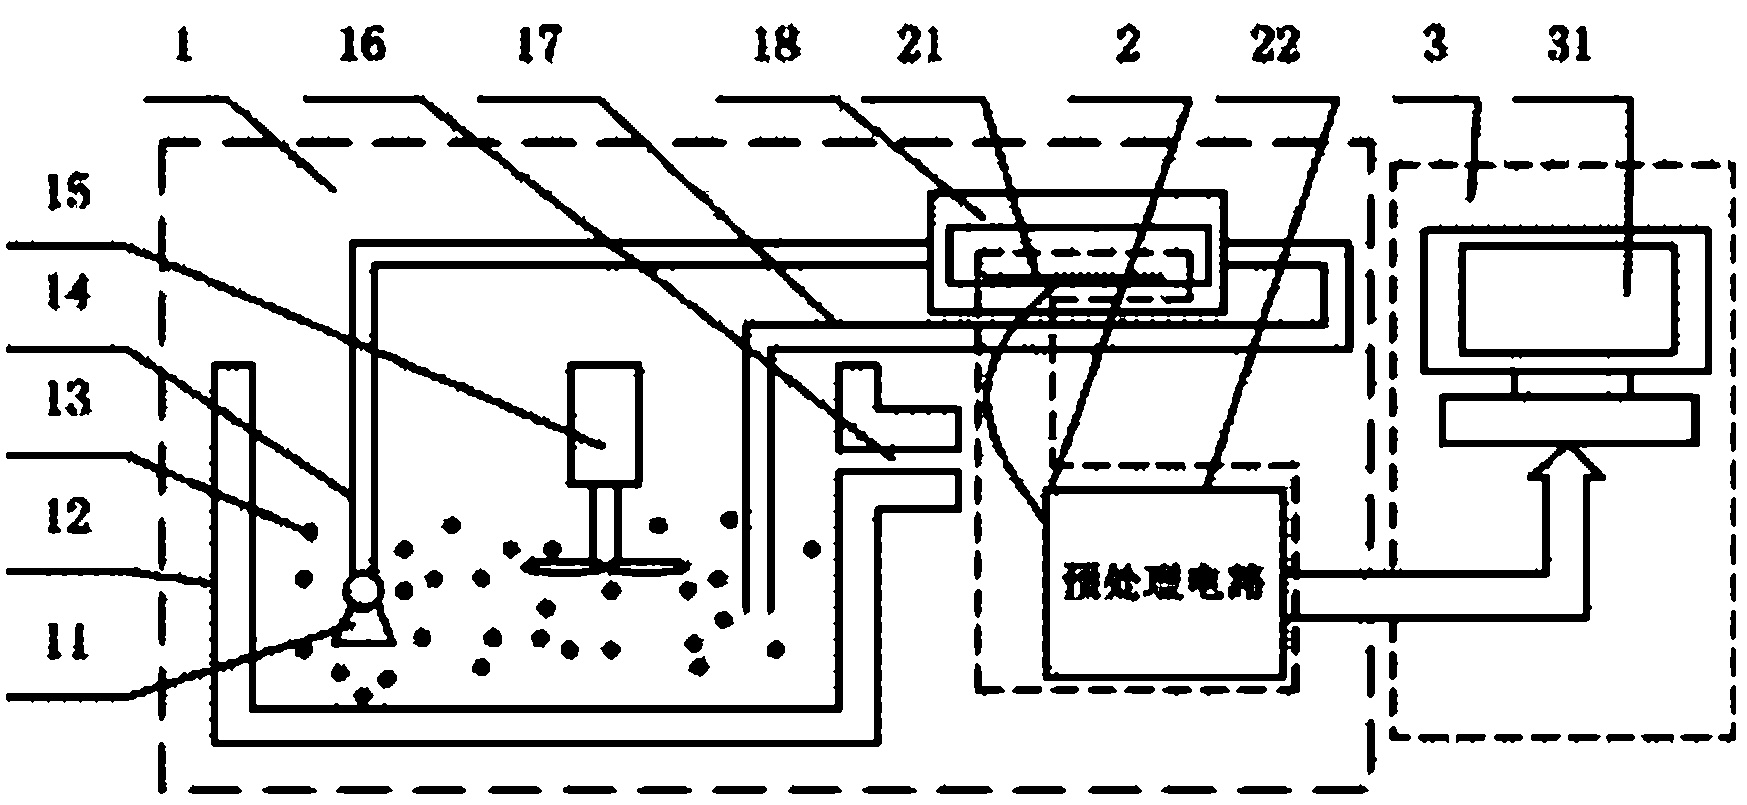 Probability distribution test device for collision by abrasive particles in solid and liquid two-phase flow on wall surface at different positions